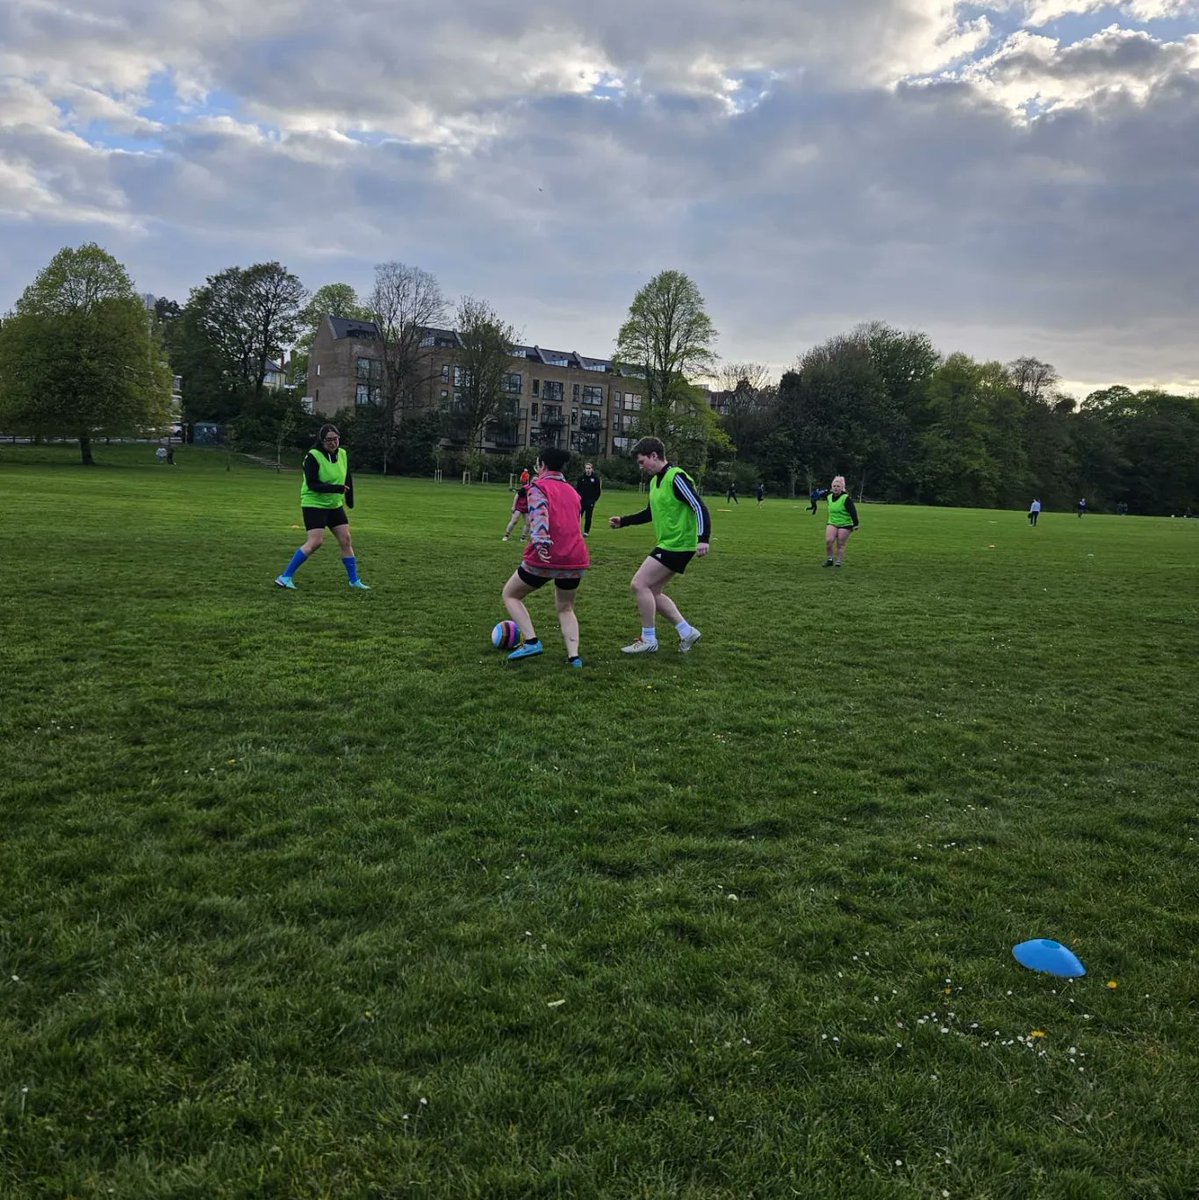 We managed to put the goals together eventually 😂 

After a very evenly matched game, the pink team snook in a goal just before the final whistle 🎉

We'll be training at Llandaff Fields all over the summer. Drop us a DM if you'd like to join us 😀

#inclusivefootball